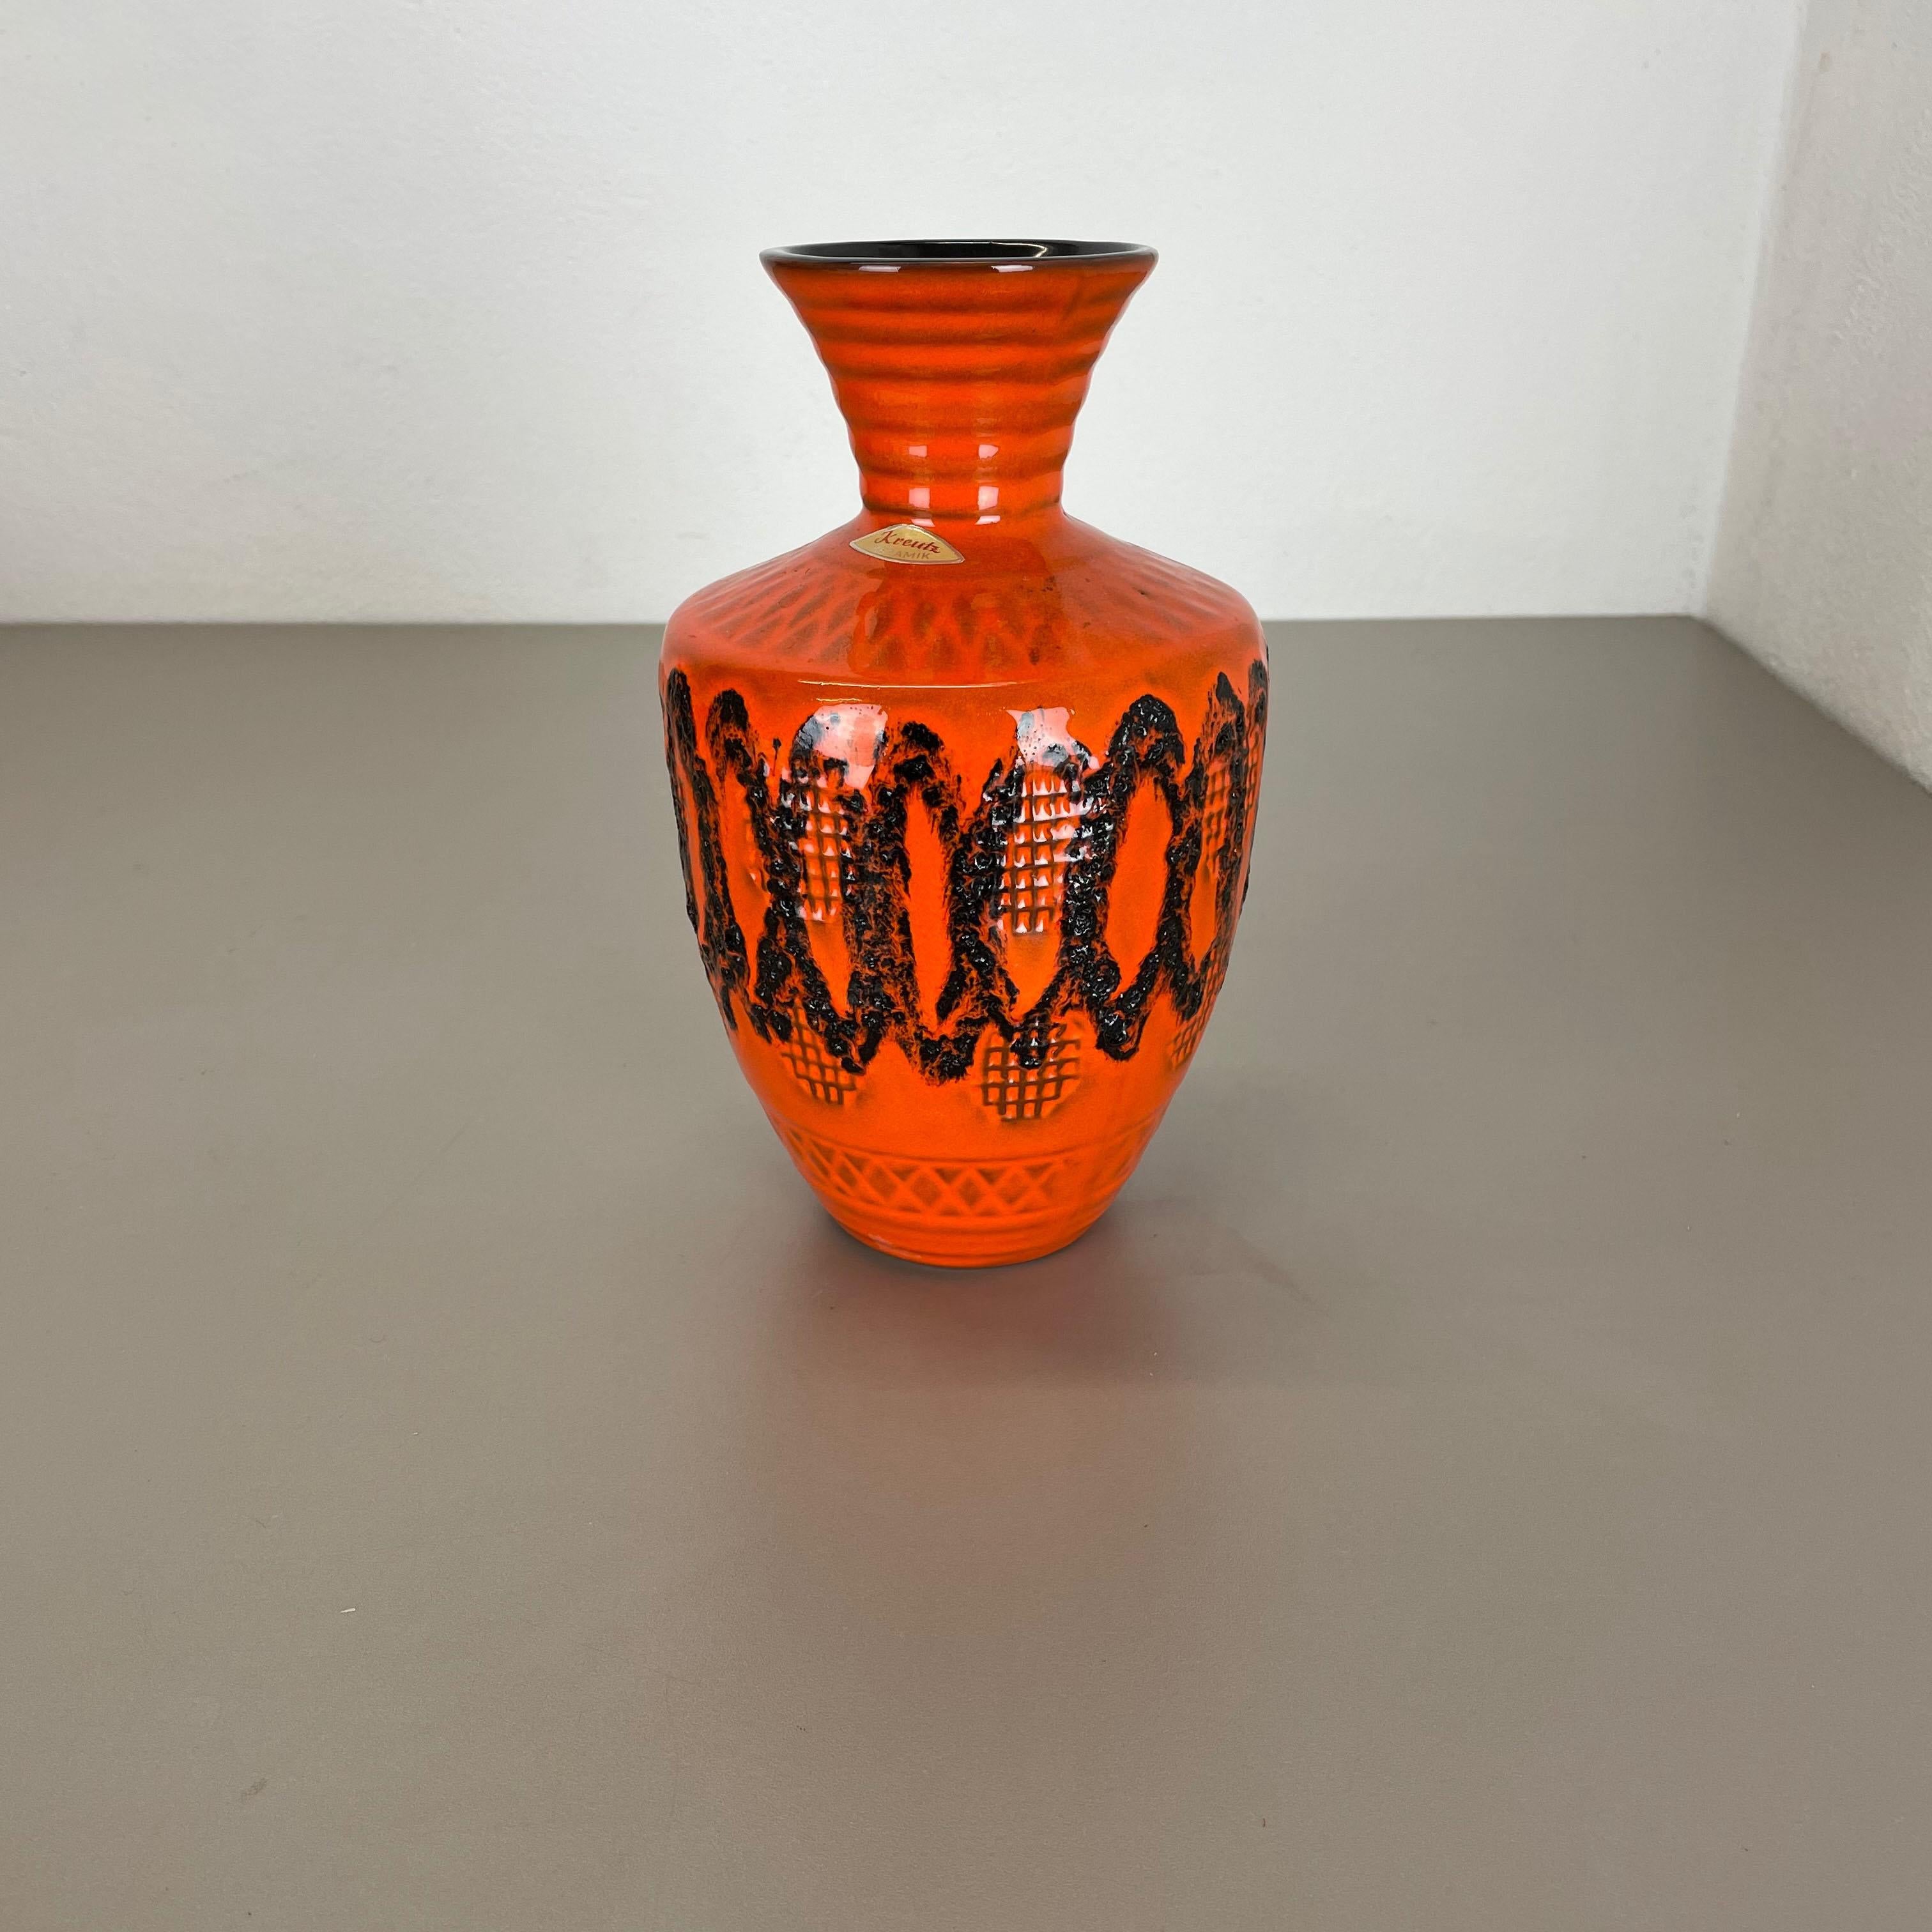 Article:

Pottery ceramic vase


Producer:

Kreutz Ceramic, Germany



Decade:

1970s




Original vintage 1970s pottery ceramic vase made in Germany. High quality German production with a nice abstract brutalist structure and